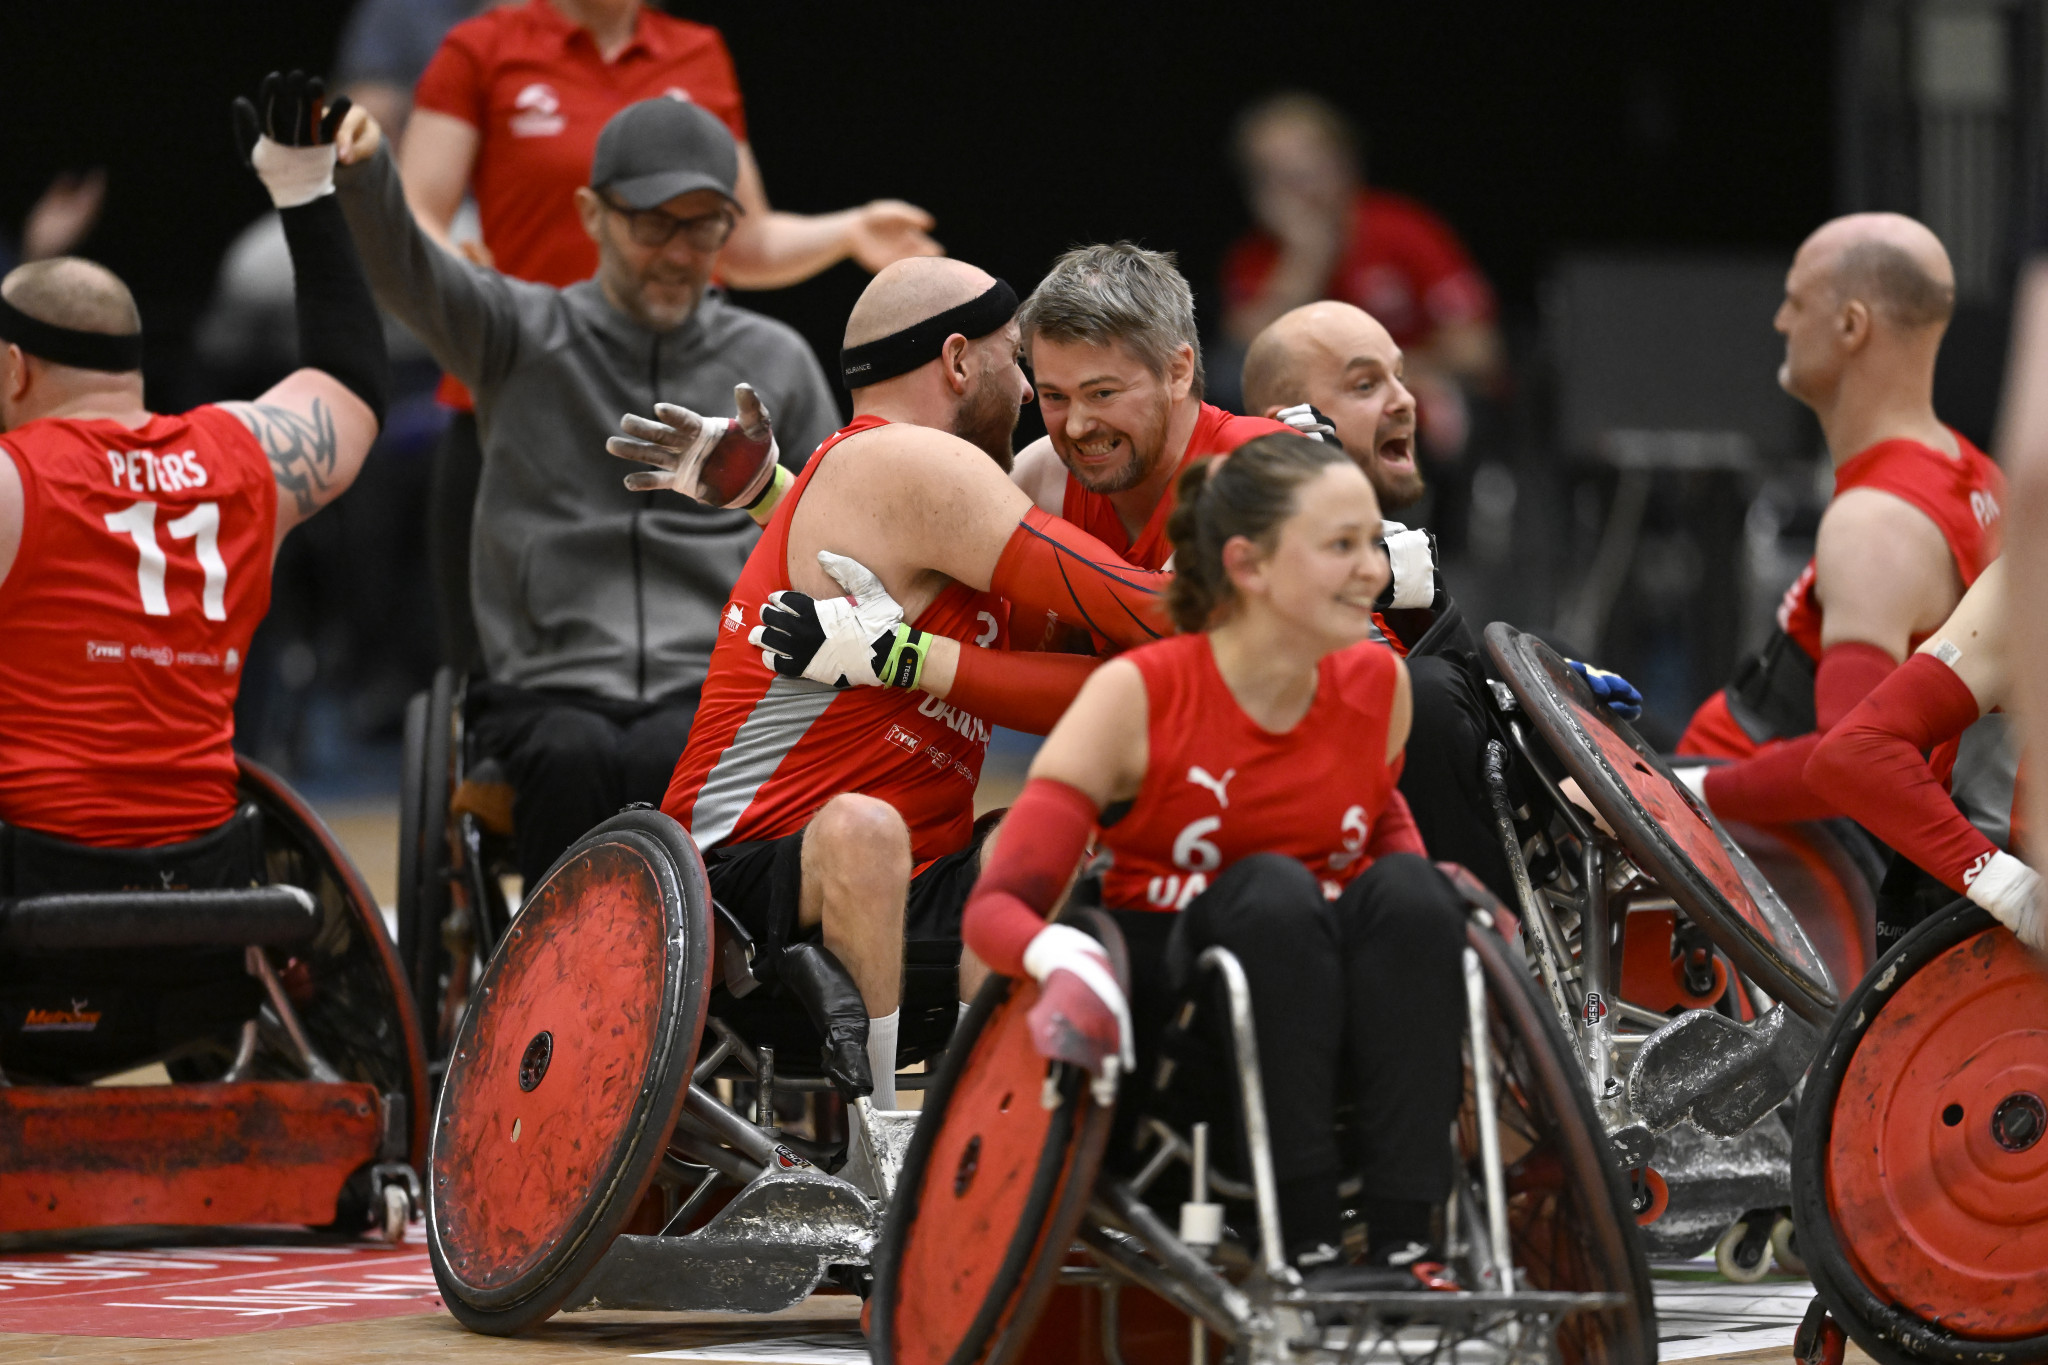 Party erupts as Denmark stun France at World Wheelchair Rugby Championship